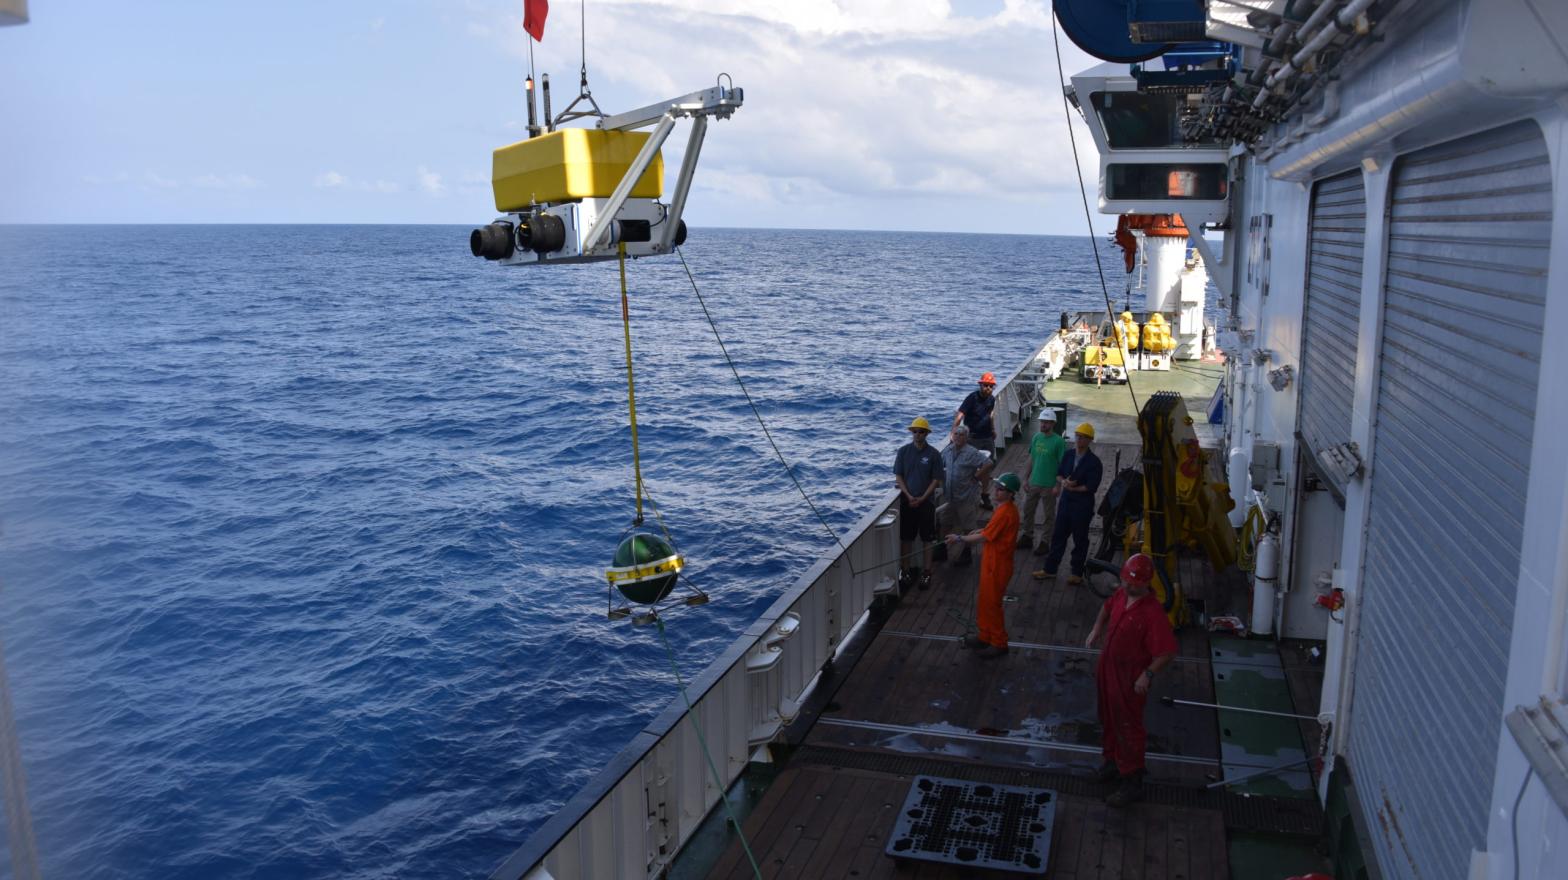 A seismometer being lifted near one of the survey sites. (Image: University of Southampton)